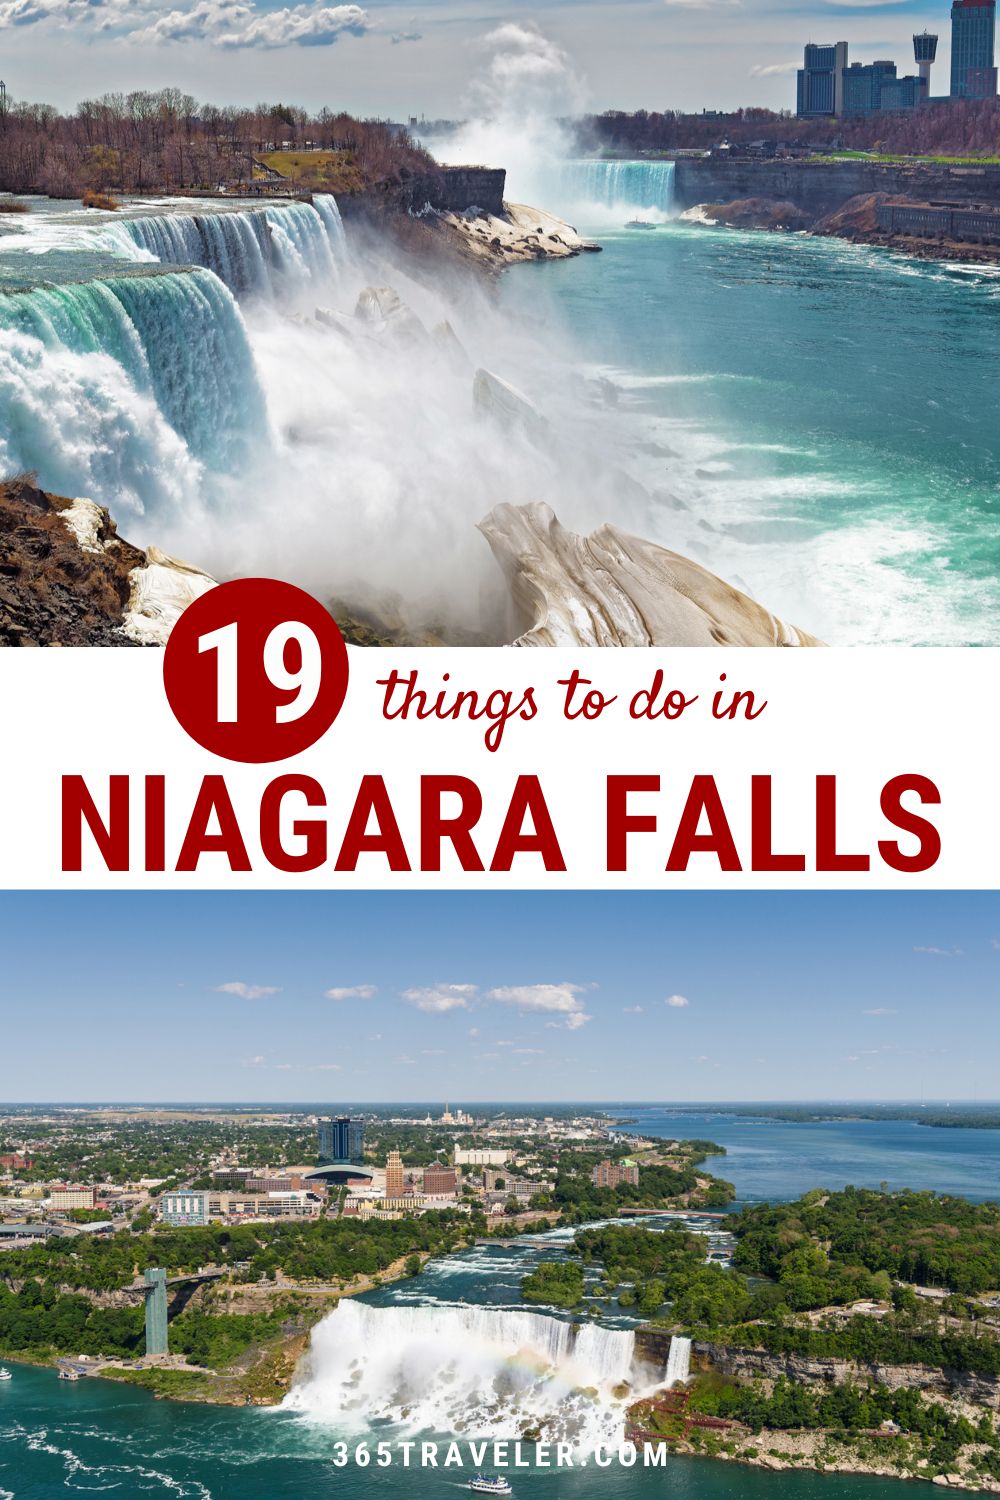 19 CAN'T-MISS THINGS TO DO IN NIAGARA FALLS NY